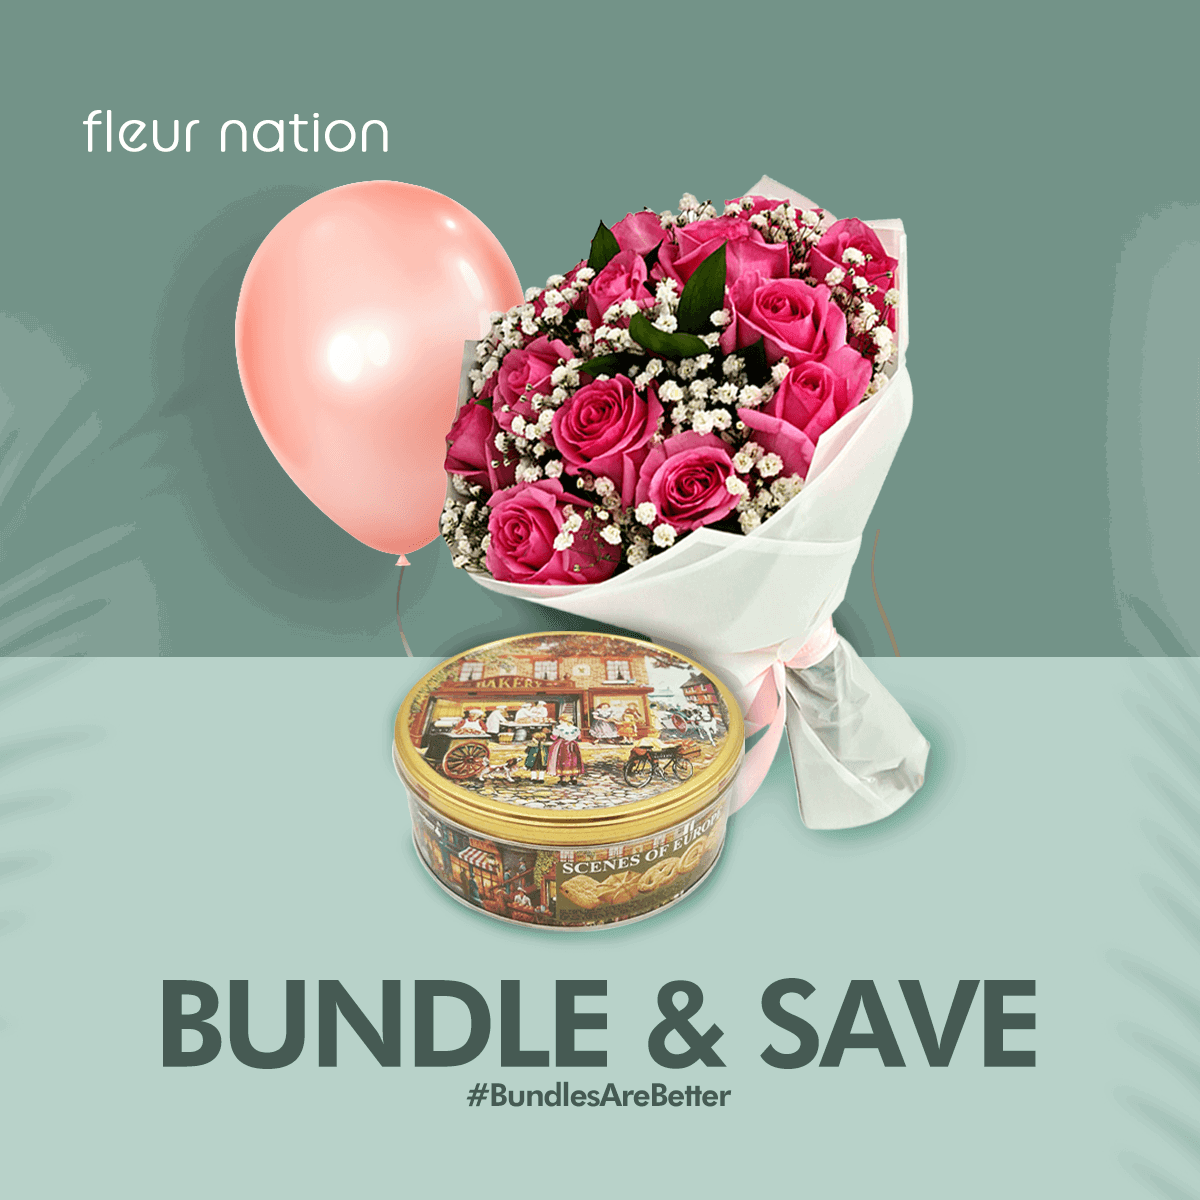 Festive Nibbles - flowers, cookies and balloon - Fleur Nation - flowers, chocolates, cakes and gifts same day delivery in Dubai